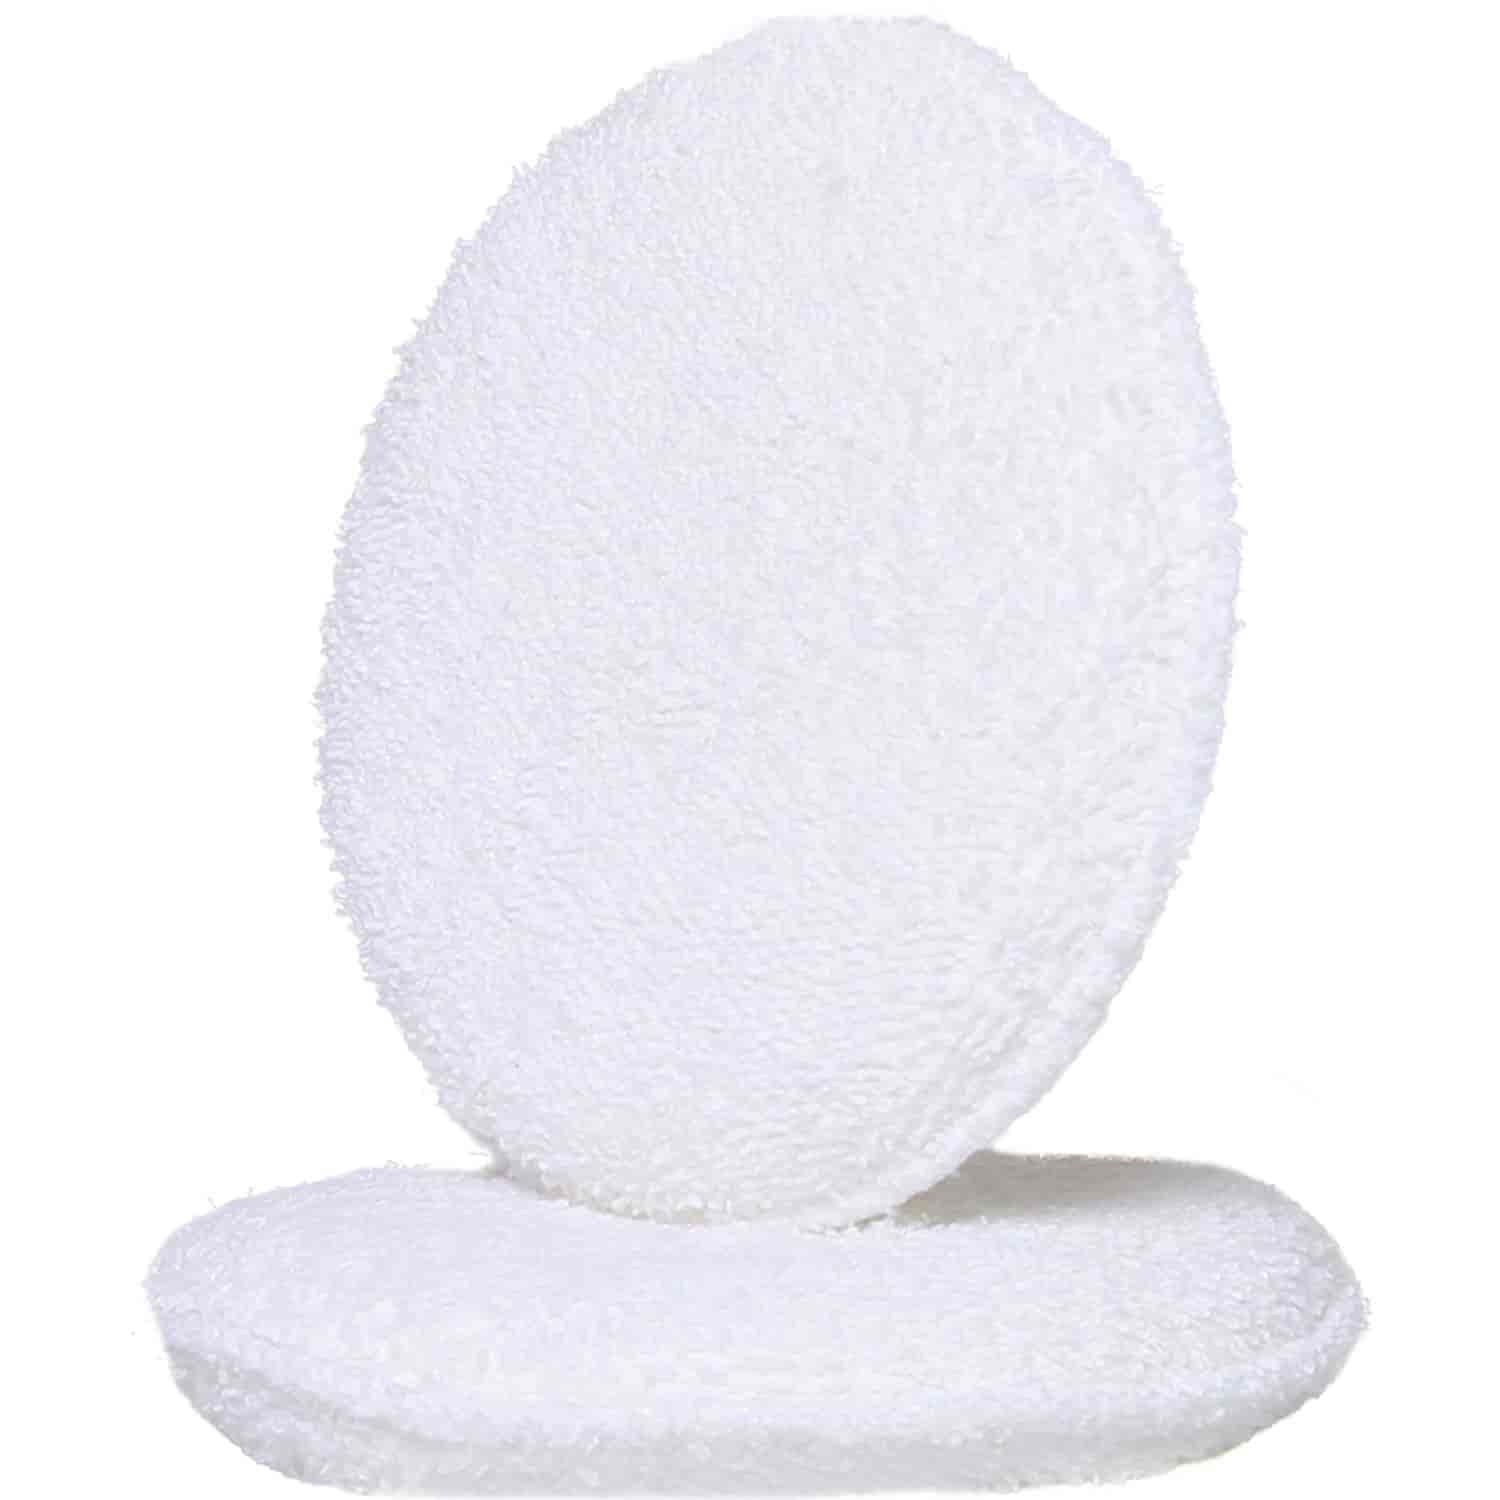 Applicator Pad Poly Sponge Wrapped In Terry Cloth